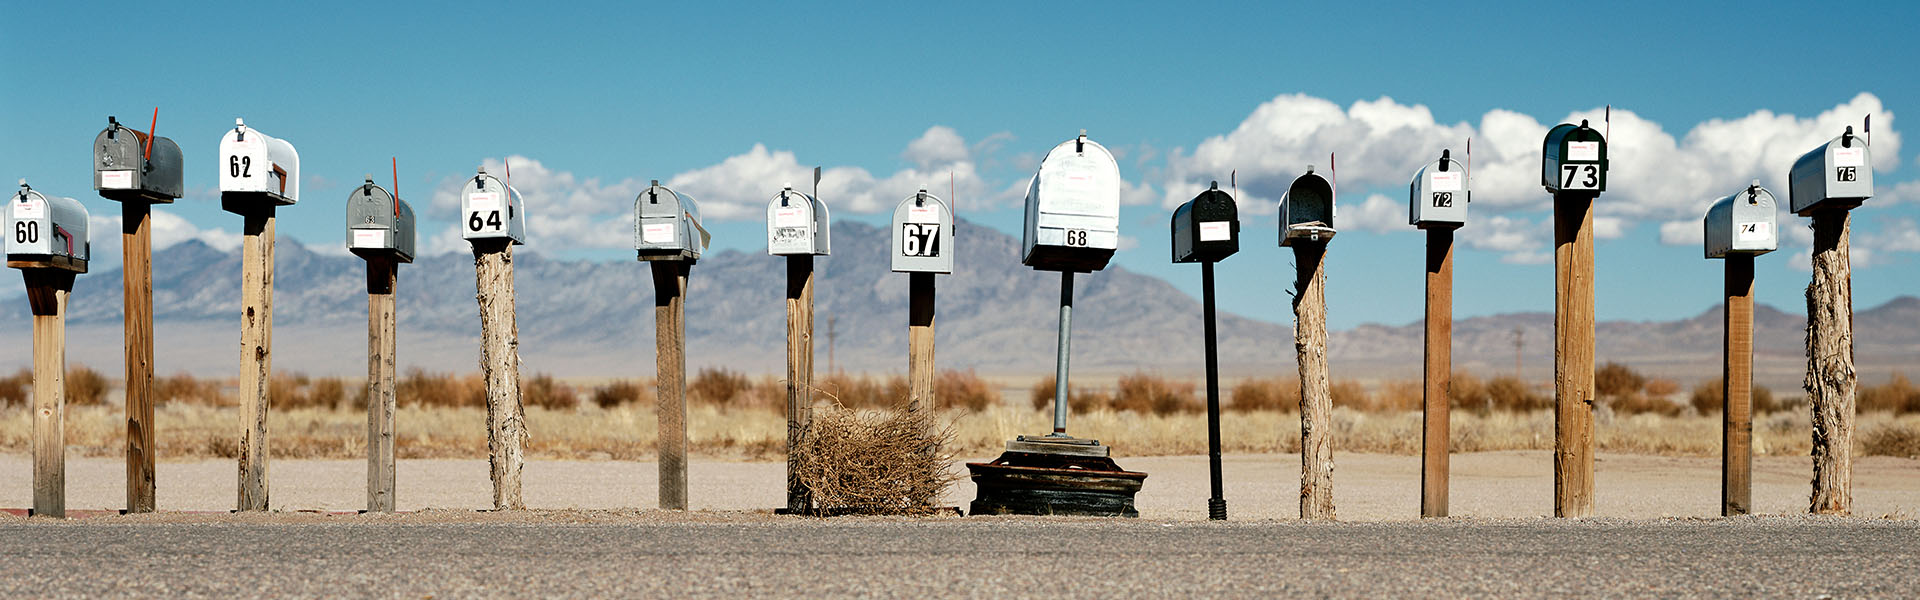 multiple mailboxes in a row